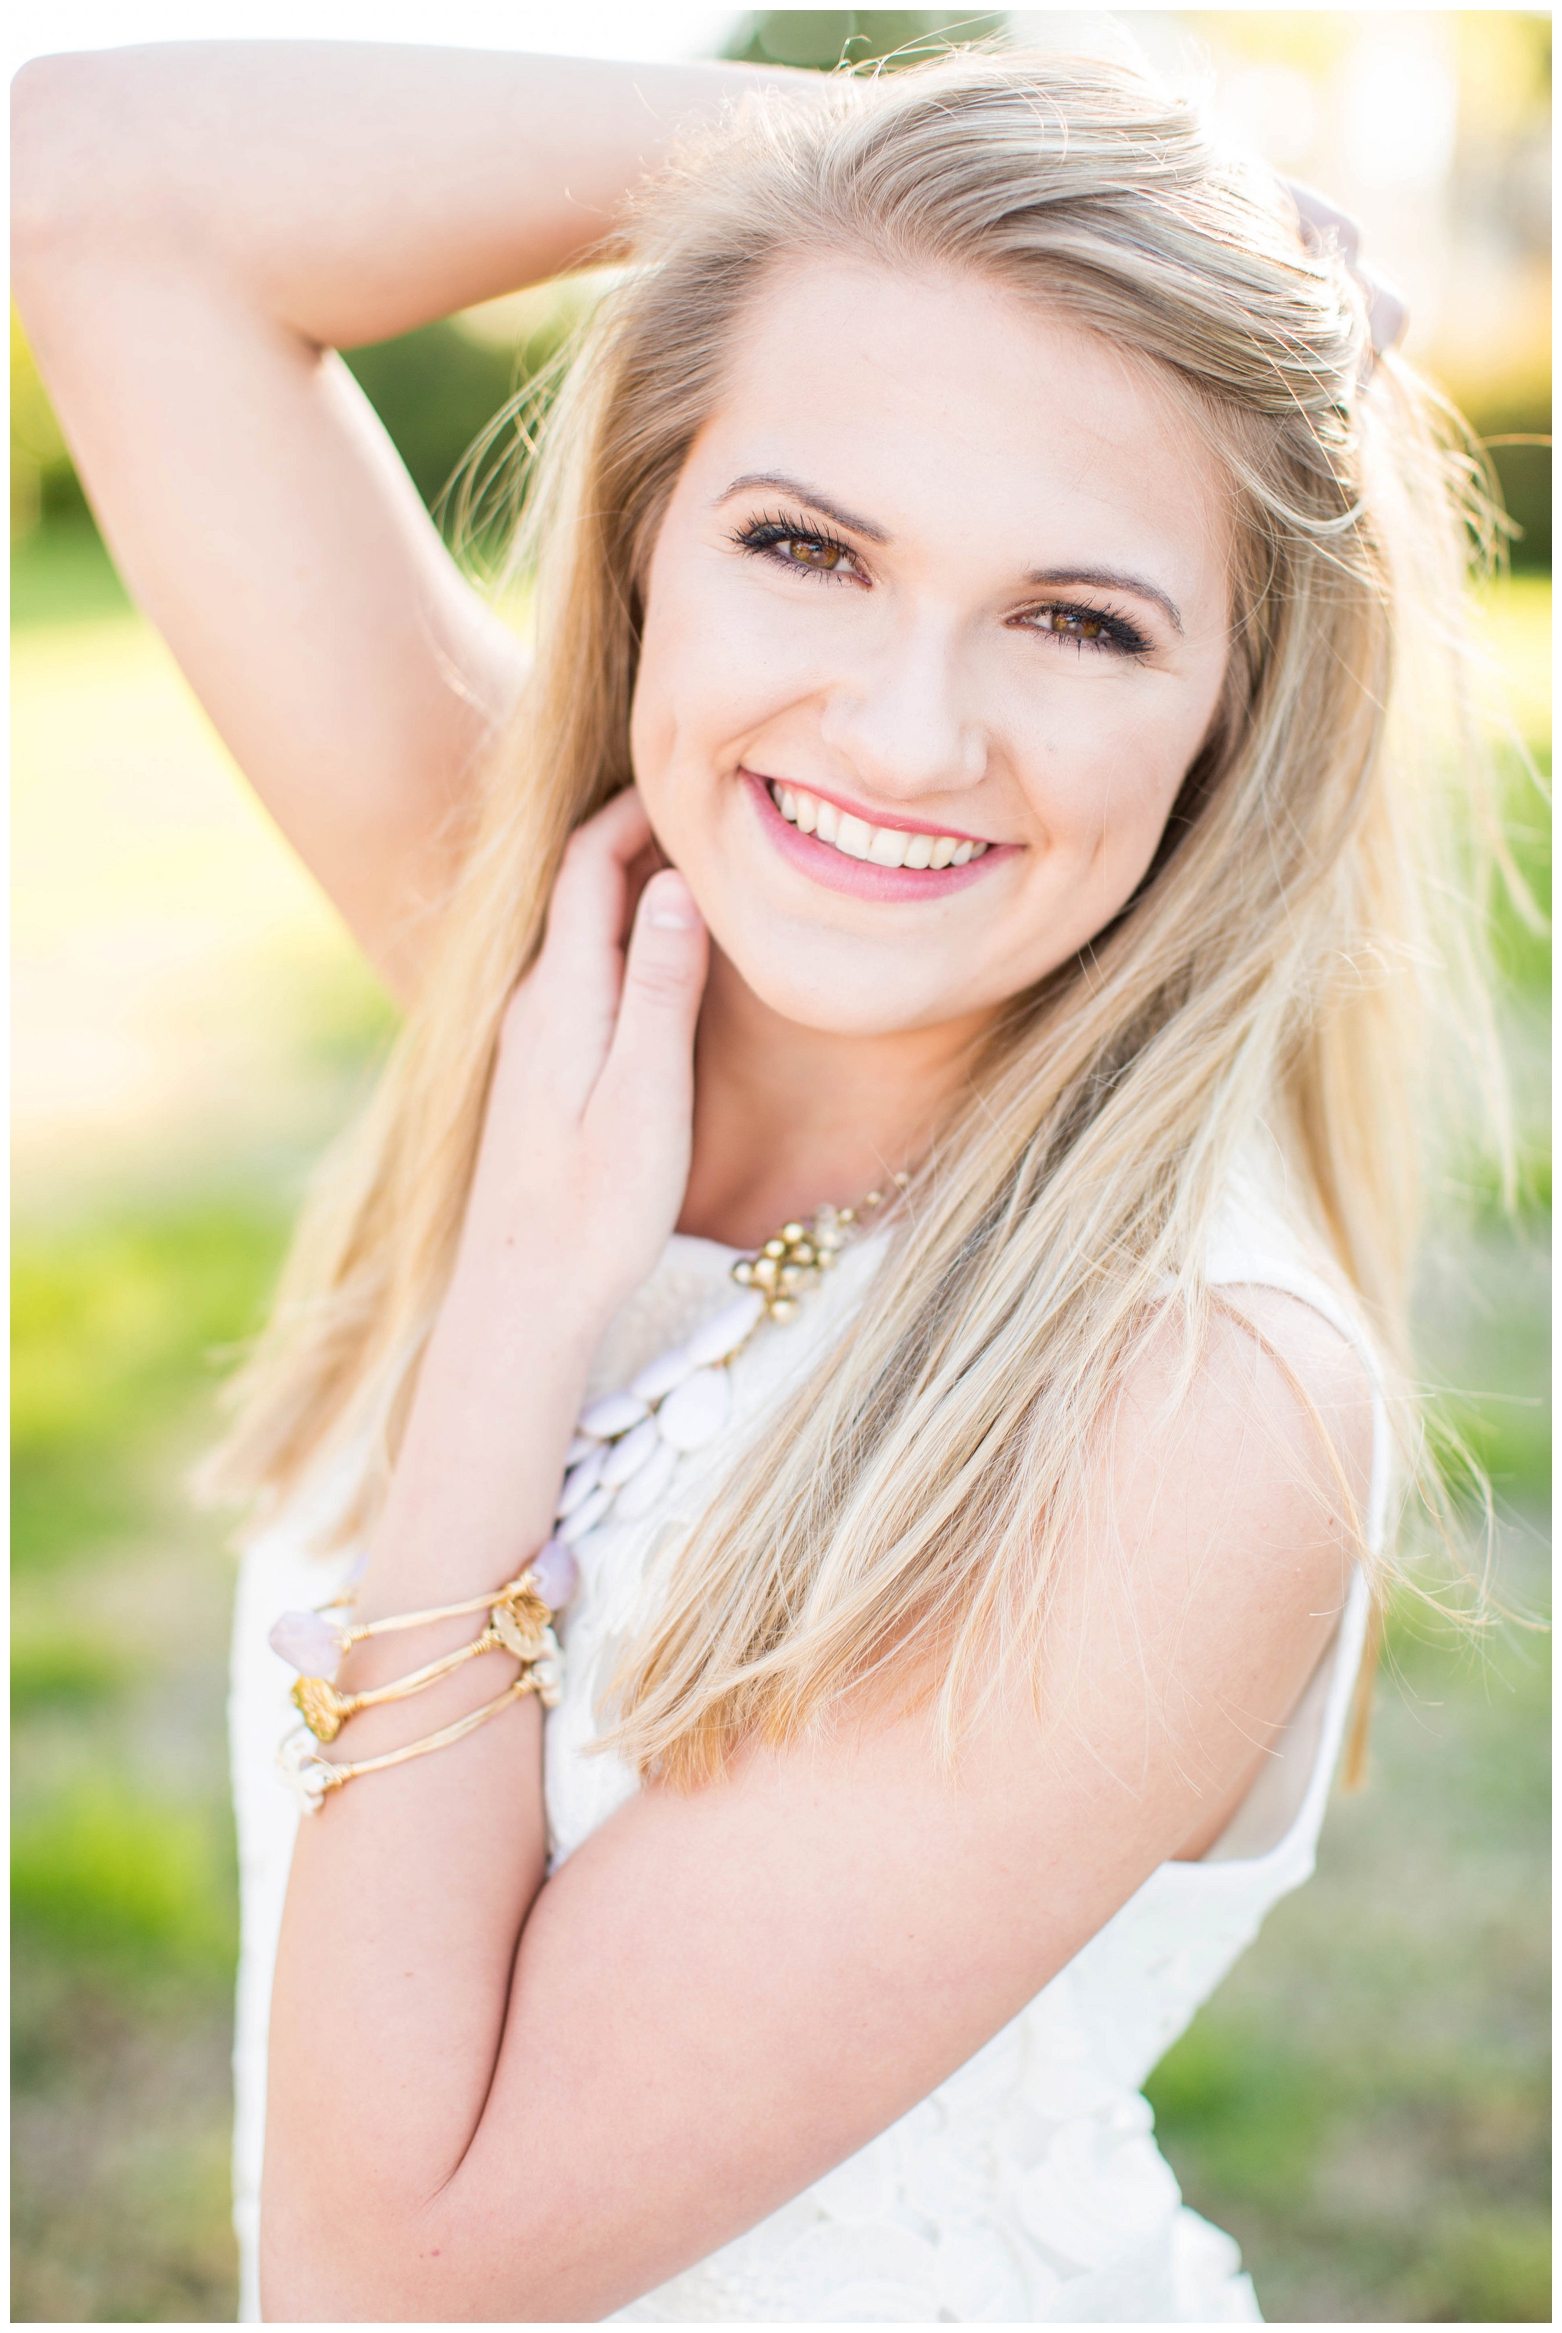 View More: http://hopetaylorphotographyphotos.pass.us/shelby-russell-senior